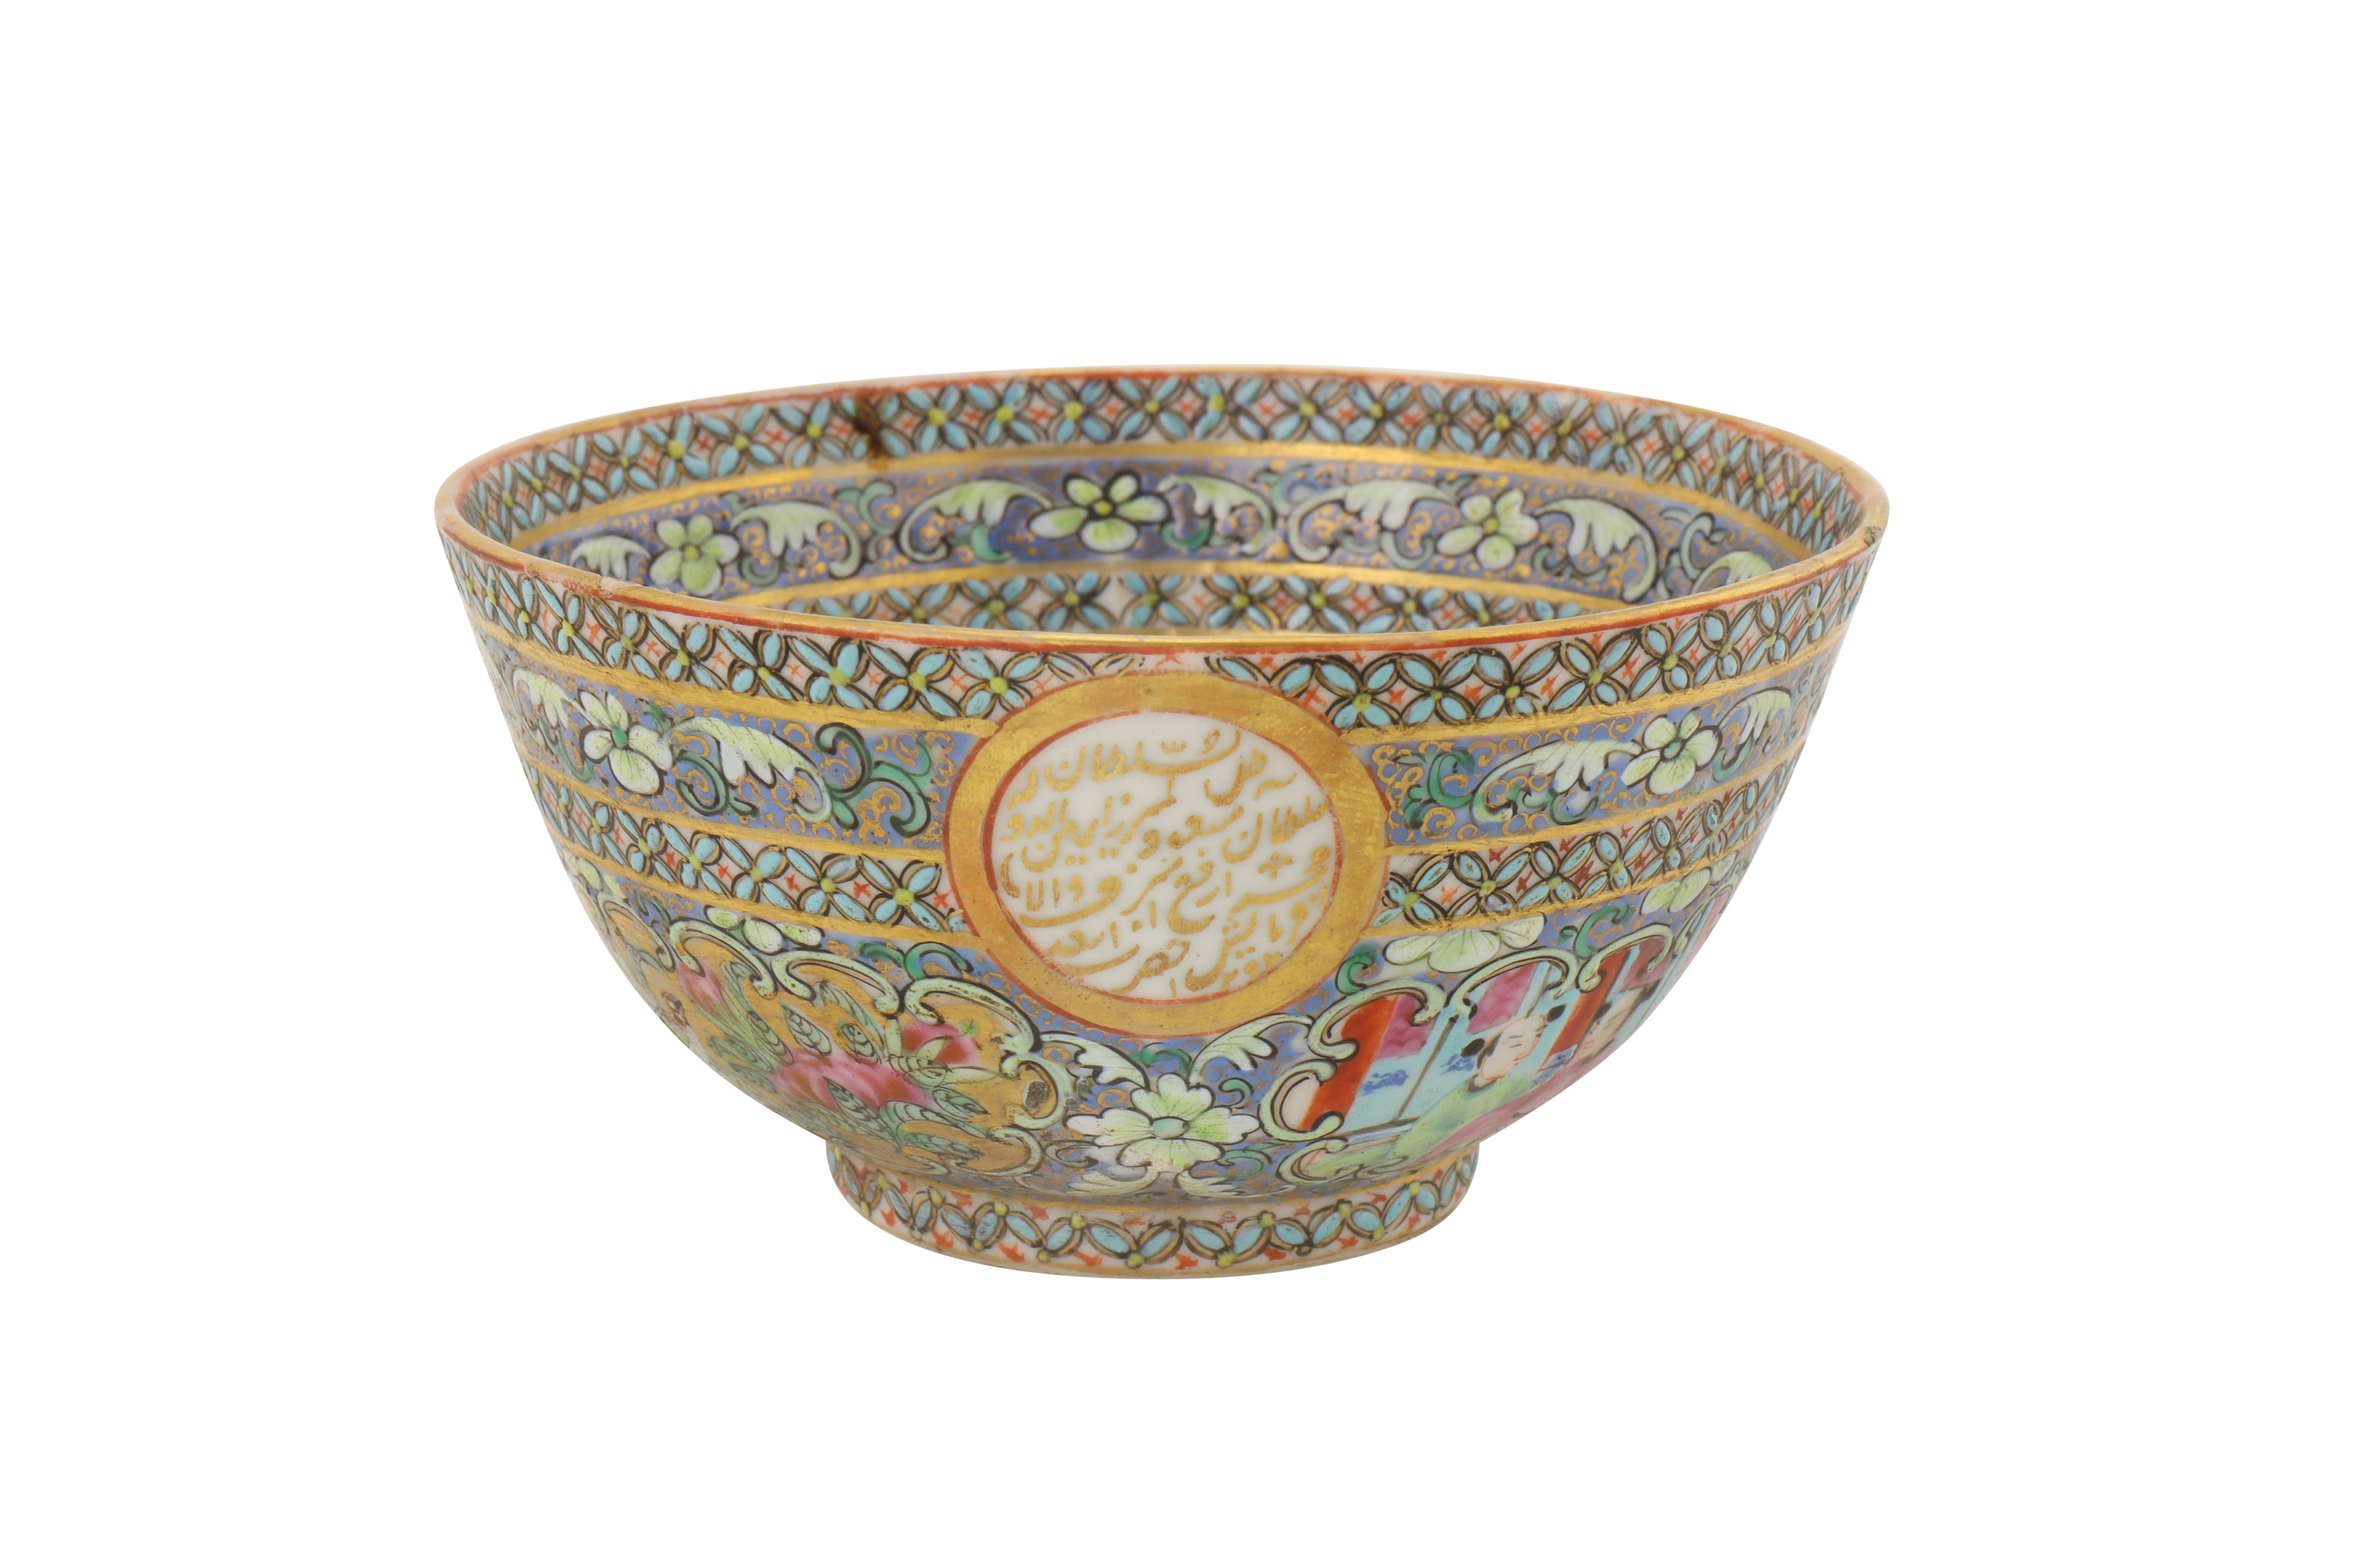 A MEDIUM-SIZED BOWL AND DISH AND SMALLER BOWL FROM THE ZILL AL-SULTAN CANTON PORCELAIN SERVICE - Image 5 of 17